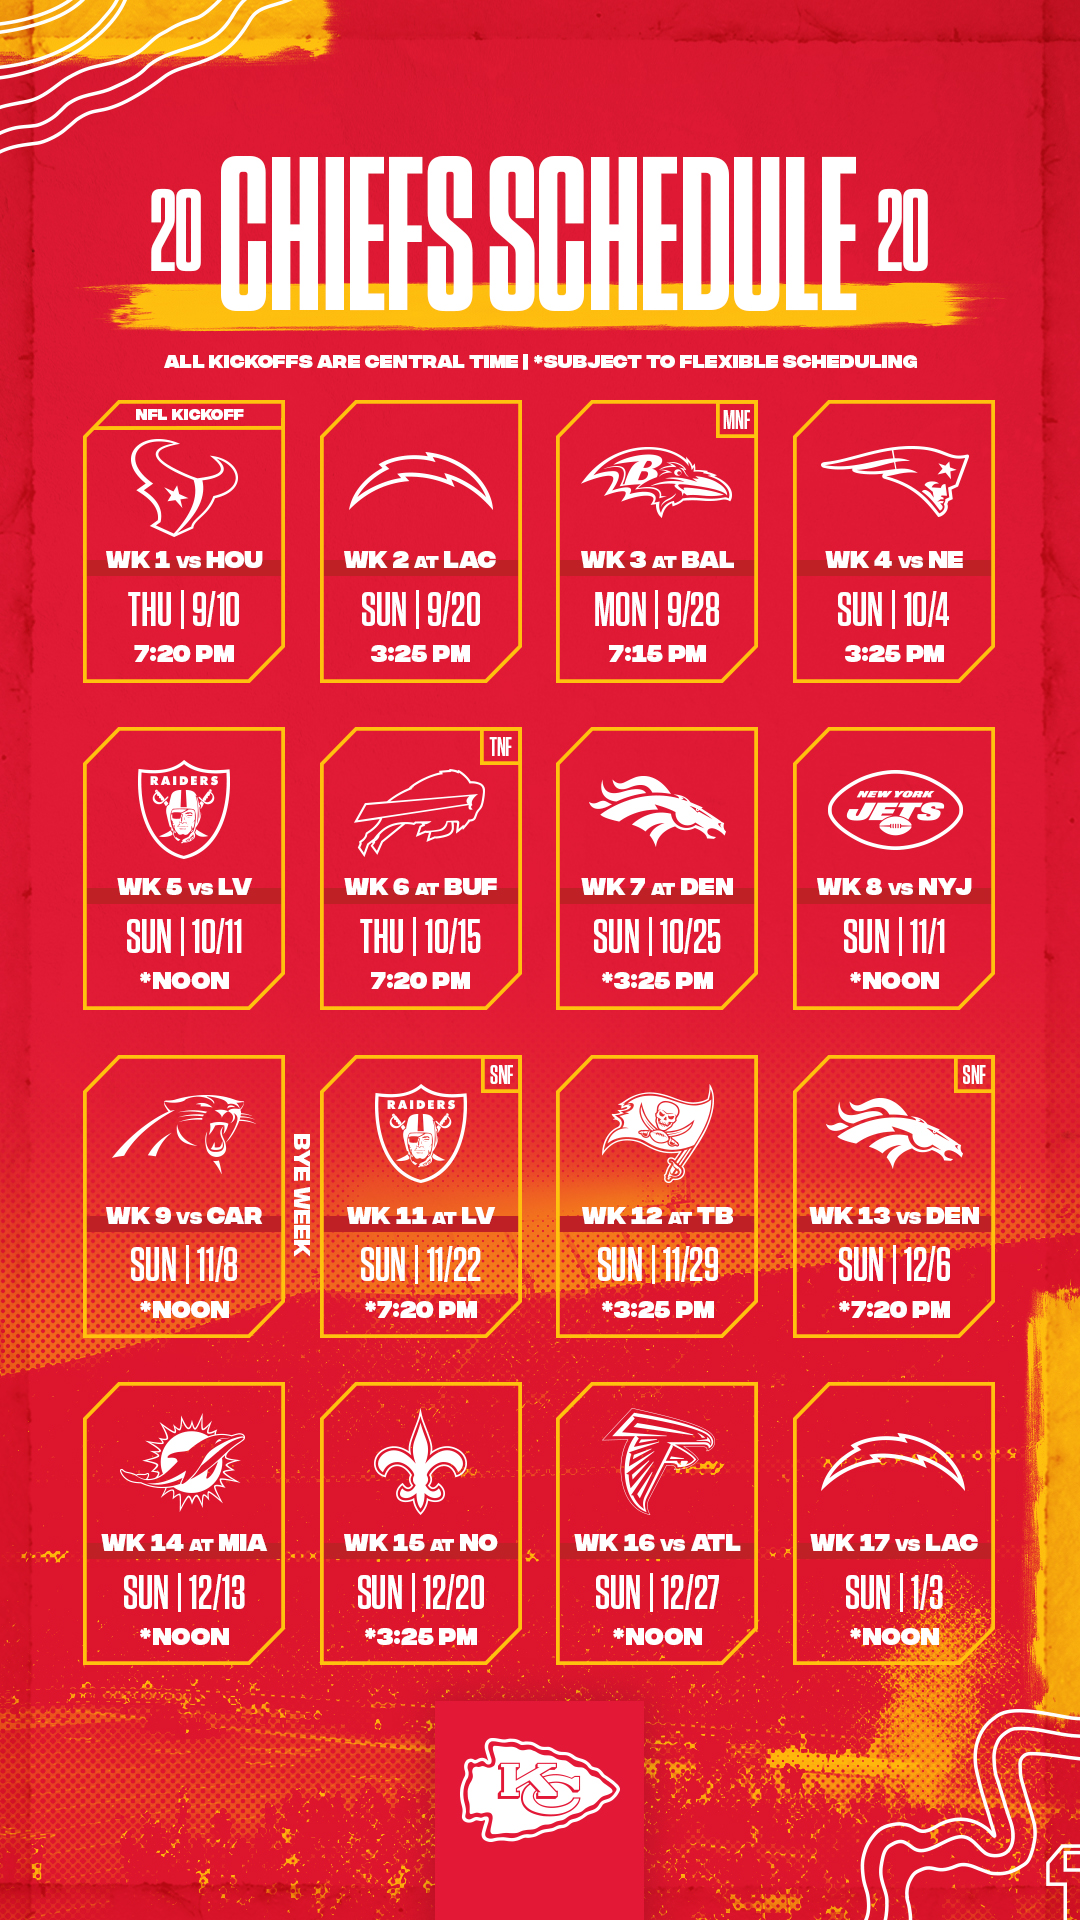 Kansas City Chiefs Schedule 2022 Printable Kansas City Chiefs On Twitter: "Trust Us, Having These Is The Easiest Way  To Memorize The Schedule 📲 Https://T.co/Z8Wvhzcaax" / Twitter